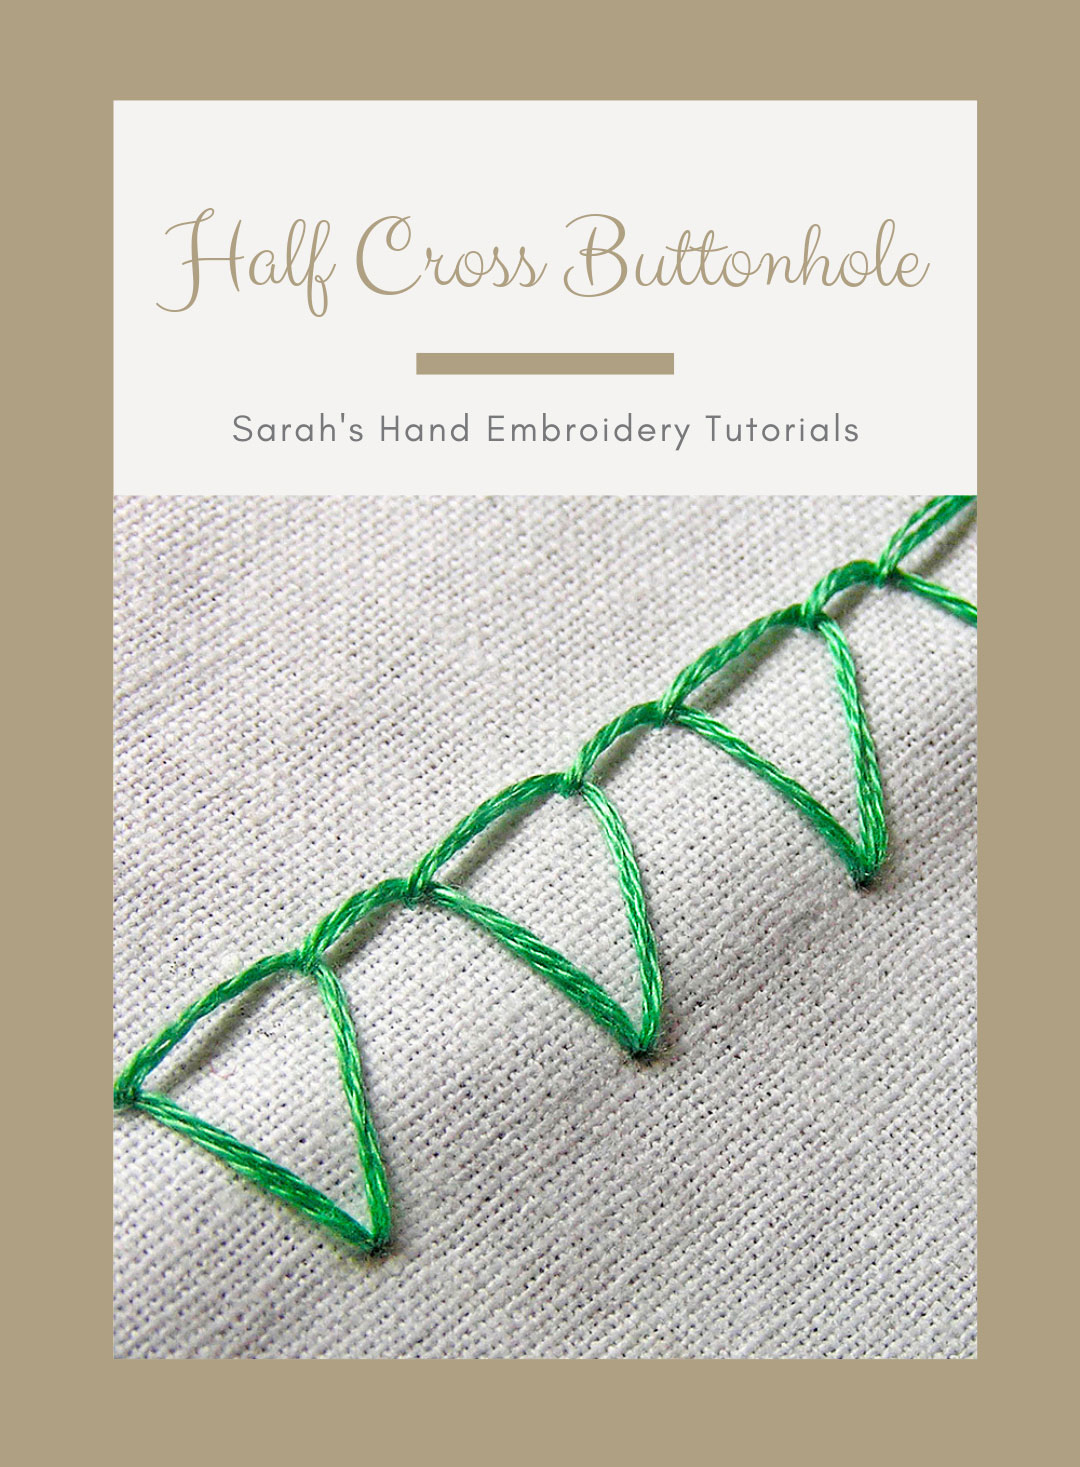 How to do Double Cross Stitch - Sarah's Hand Embroidery Tutorials